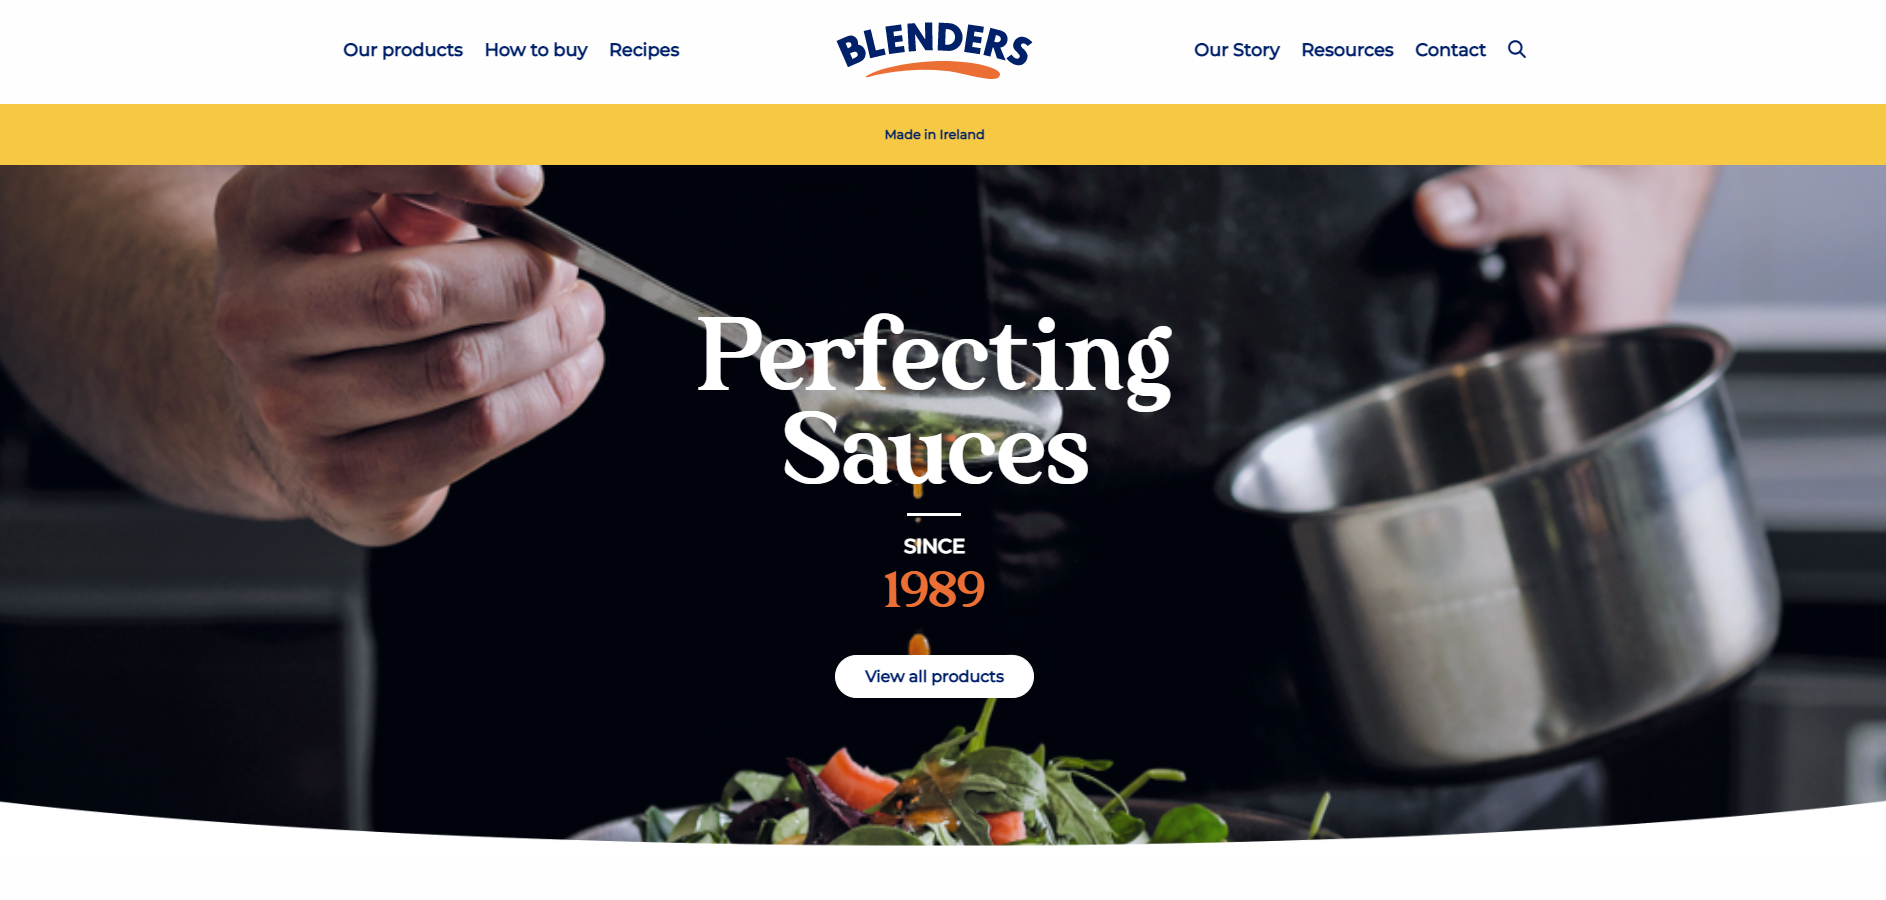 Blenders Launches New Website!